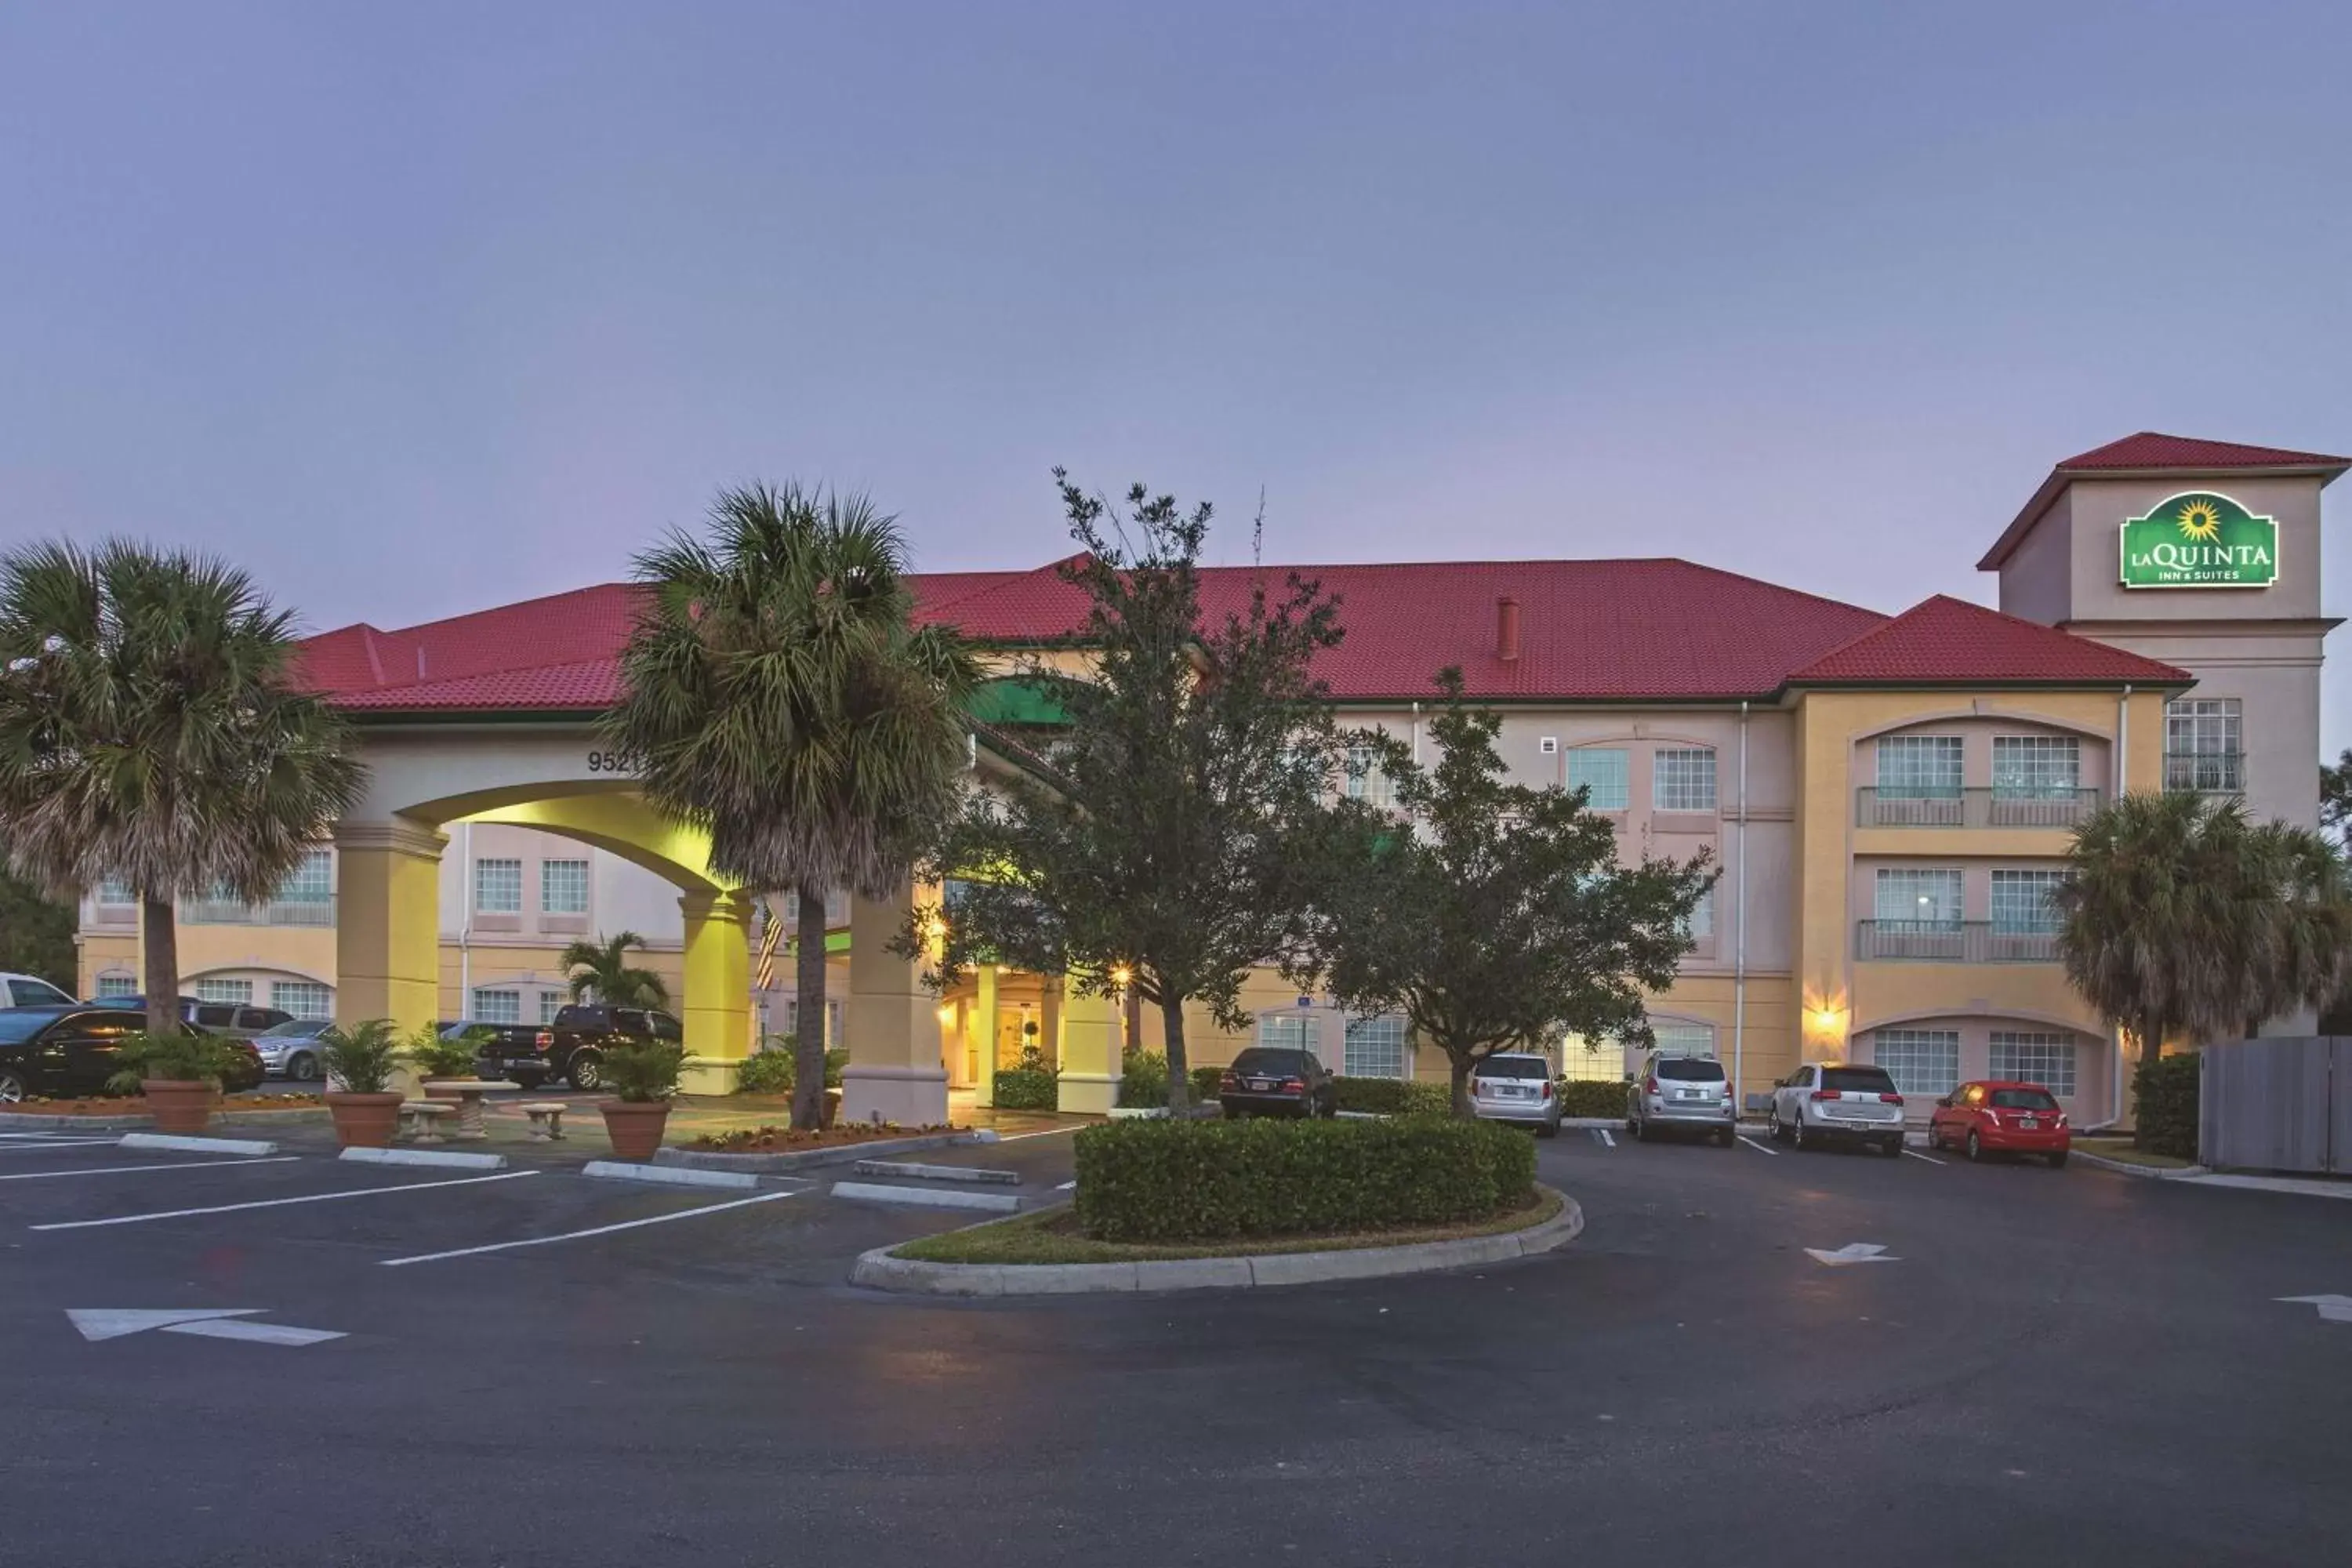 Property Building in La Quinta Inn and Suites Fort Myers I-75